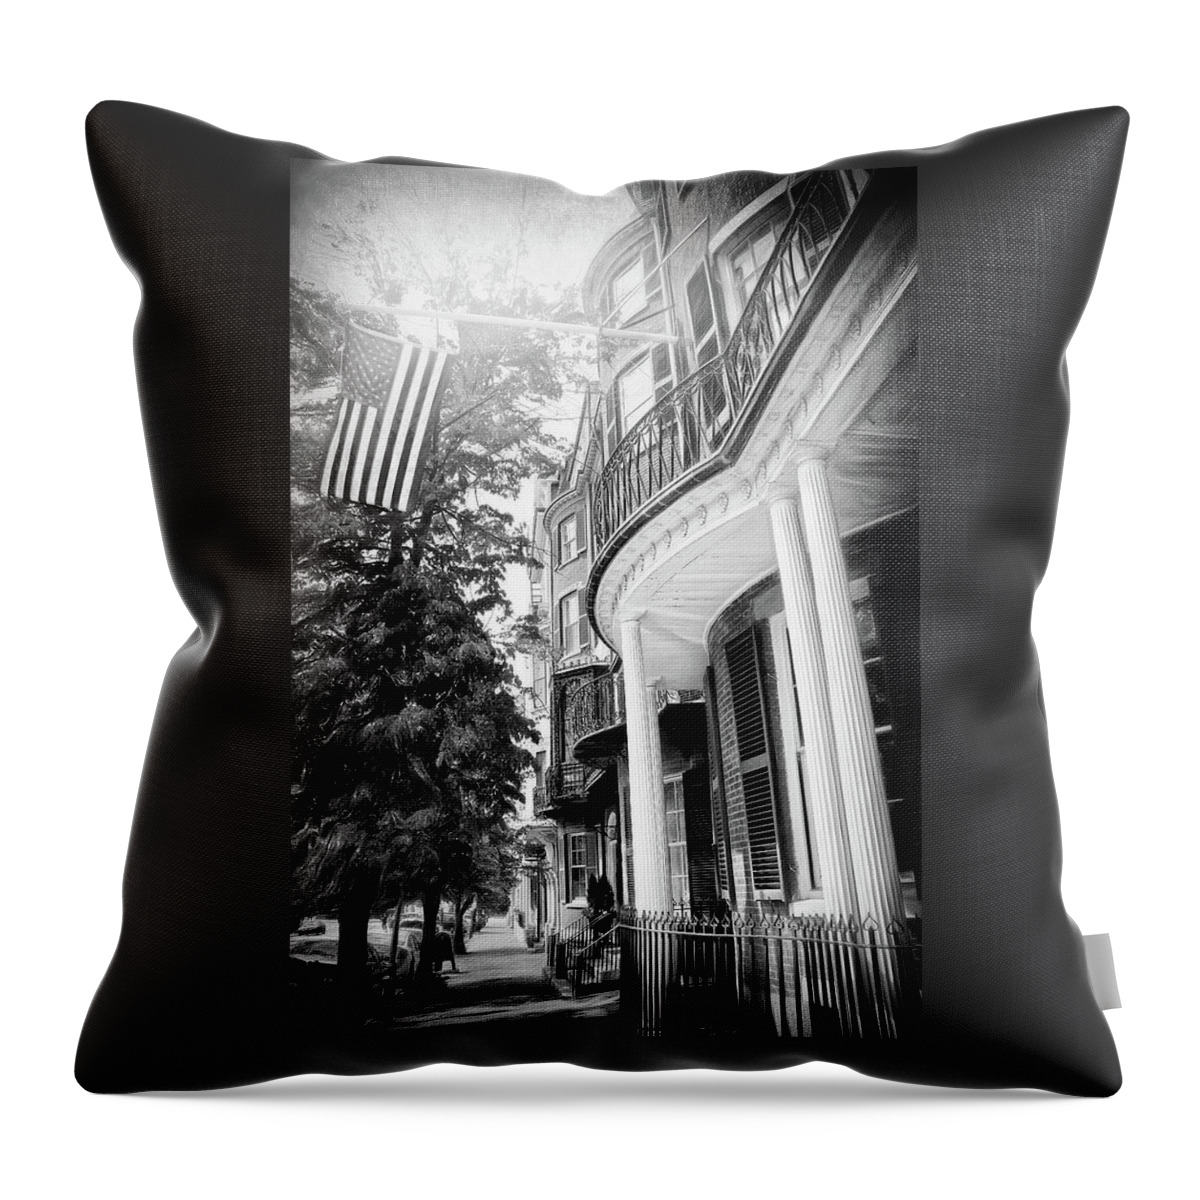 Boston Throw Pillow featuring the photograph Beacon Hill Boston Massachusetts Black and White by Carol Japp